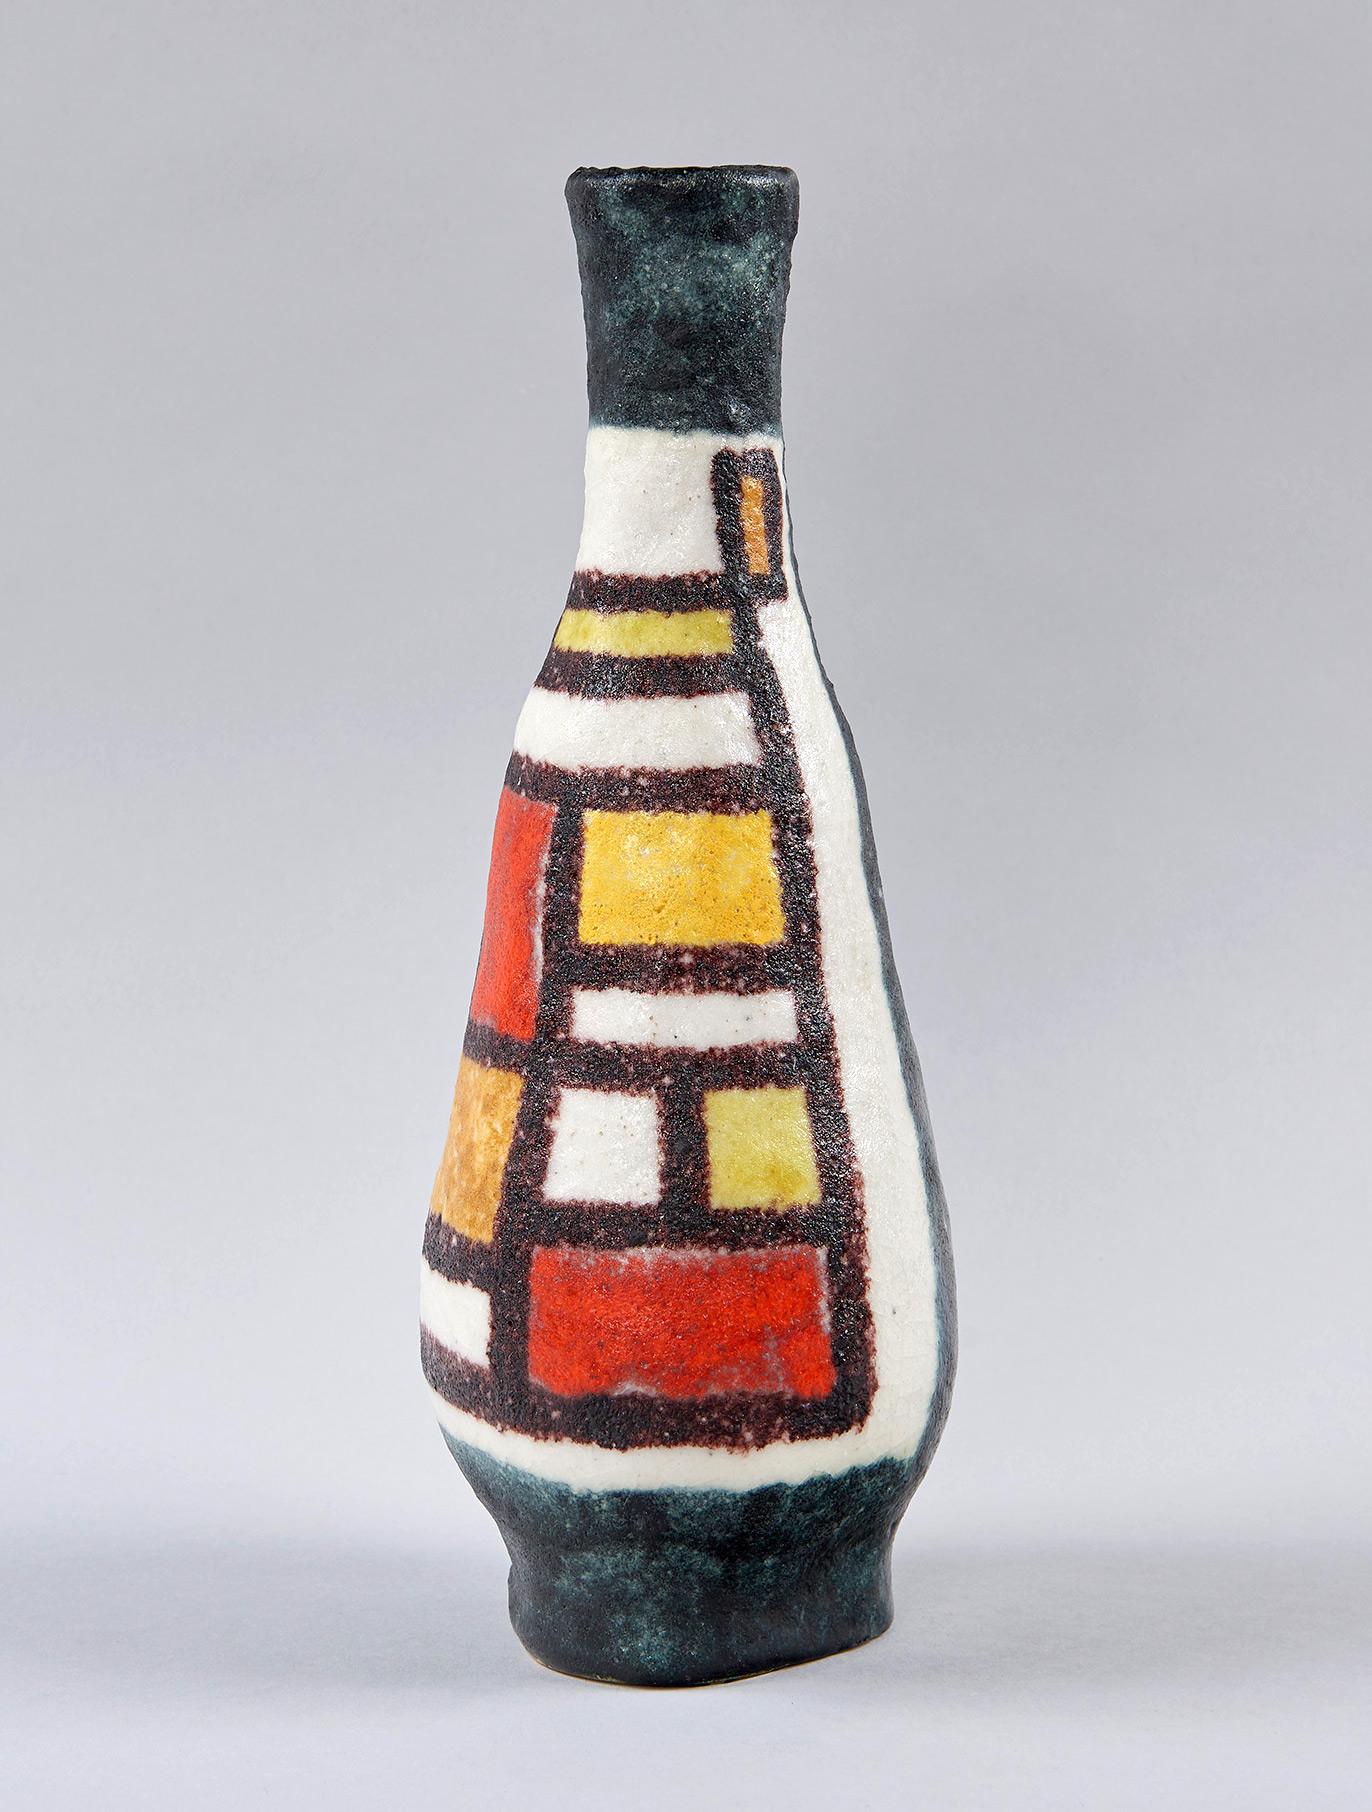 A beautiful 1950s faience vase by post-war Italy's most celebrated ceramist, decorated with a colorful, Mondrianesque pattern. Signed with Gambone's famous 